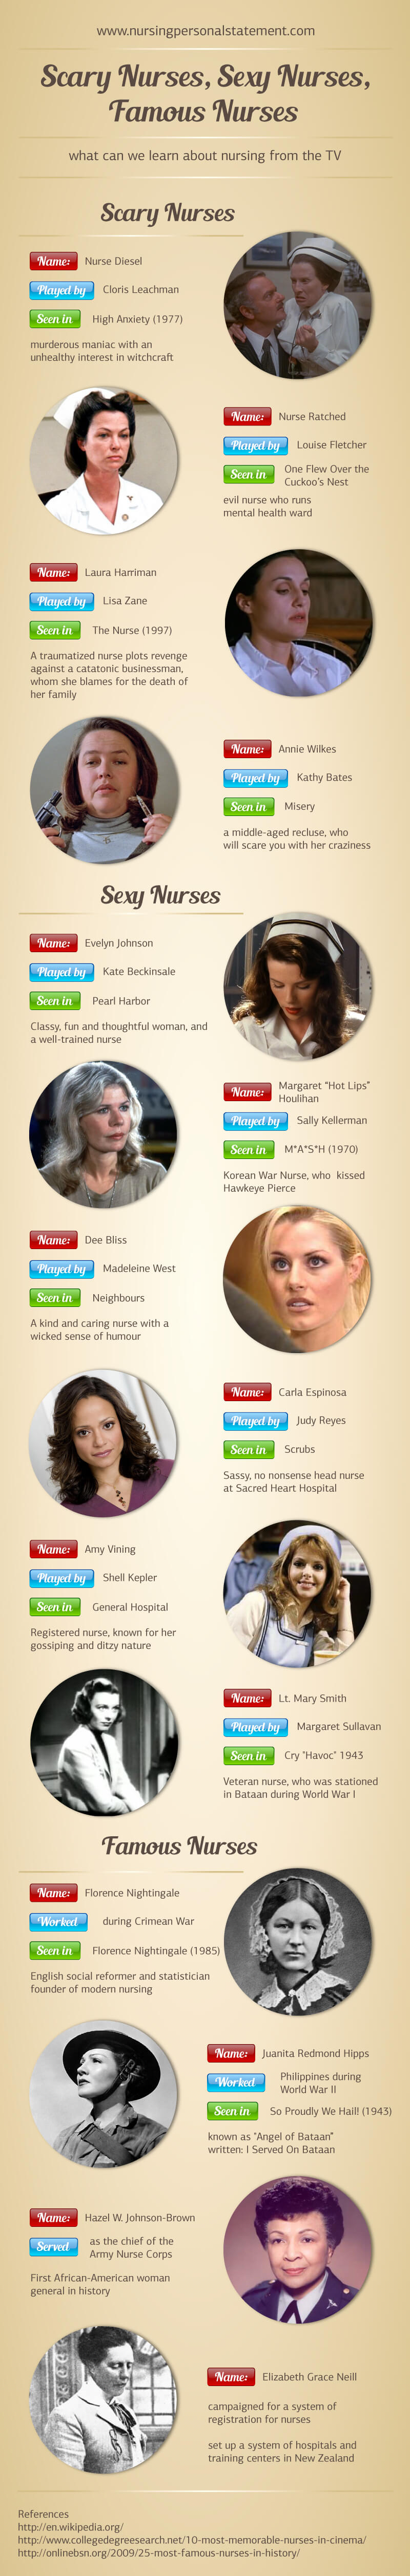 famous-nurses-infographic-what-we-learn-about-nursing-from-the-tv